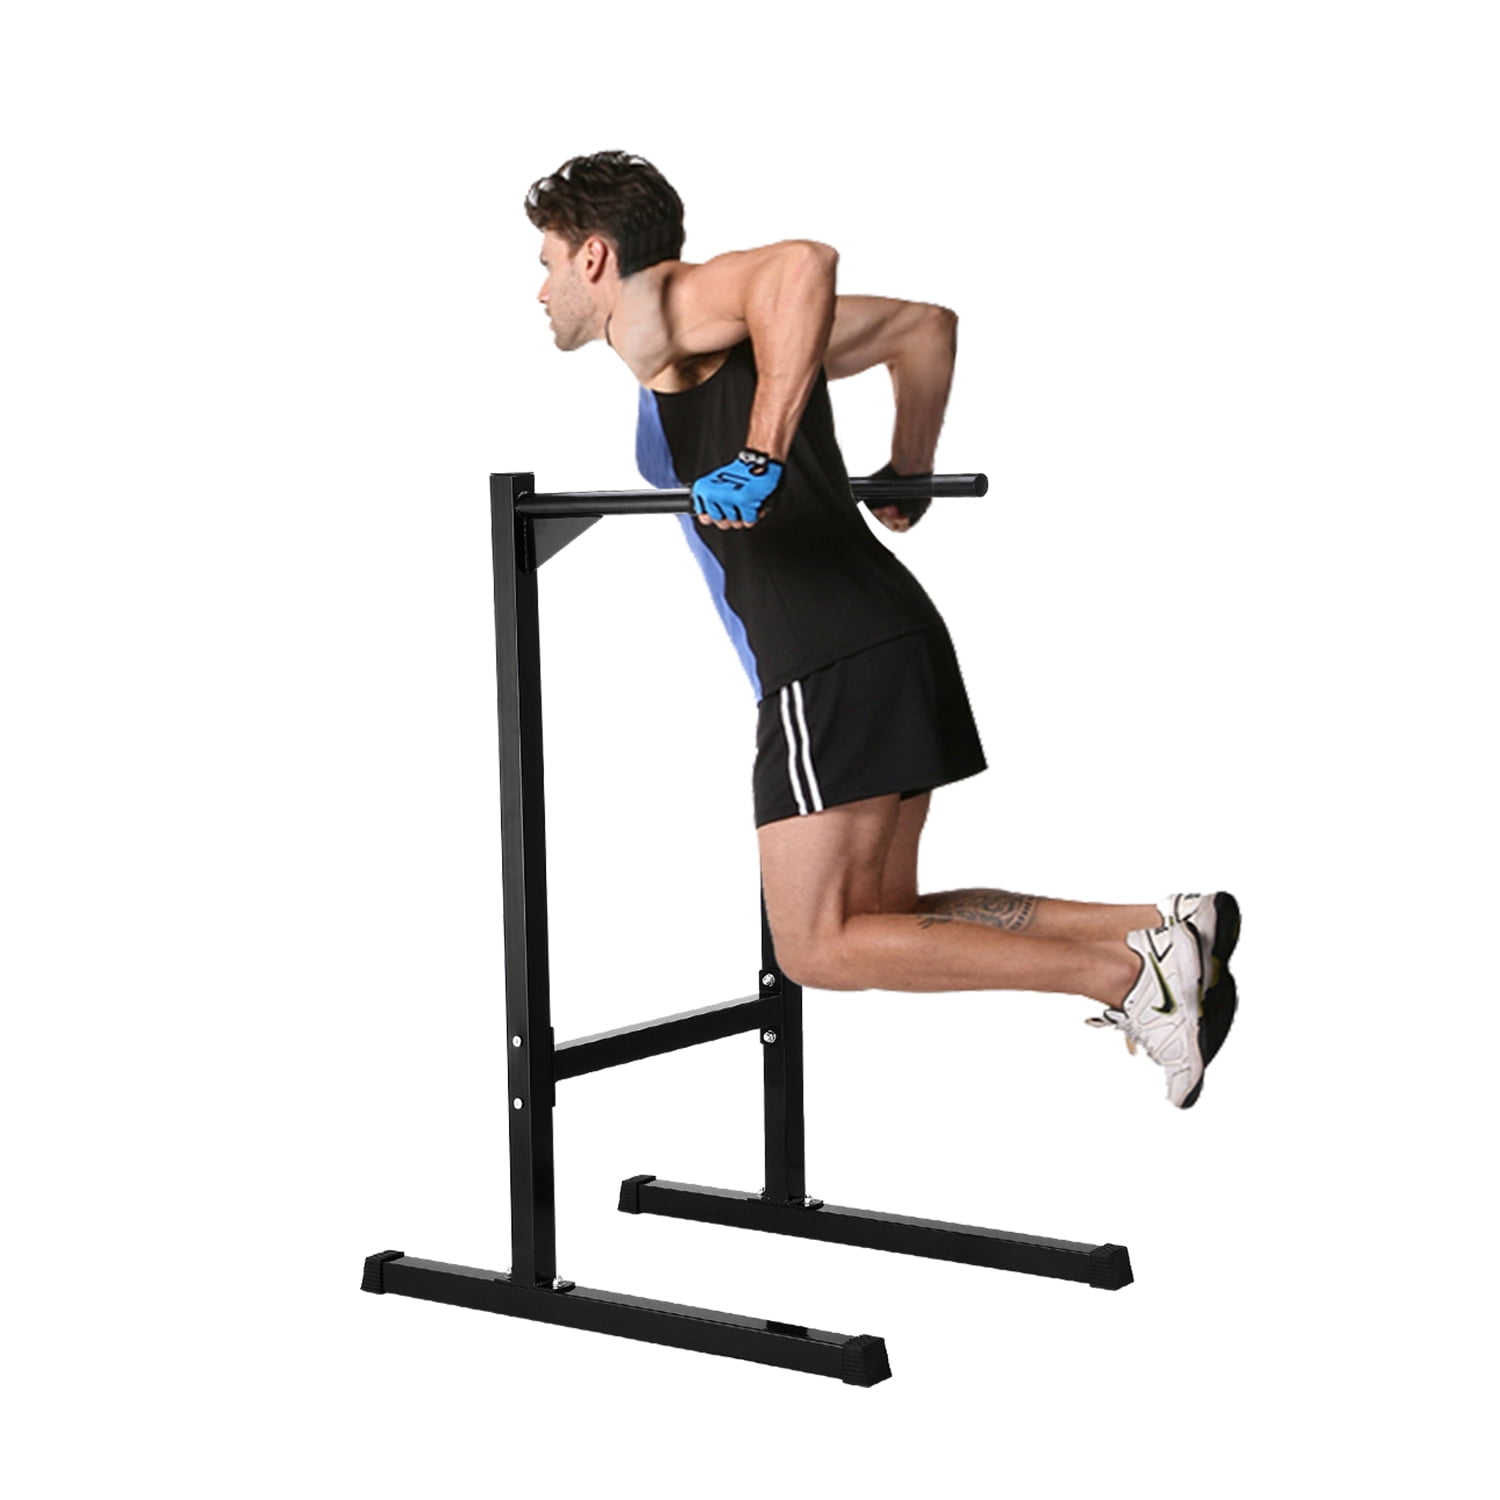 Parallel Dip Station Bars Stand Home Gym Trainer Workout Calisthenics set 